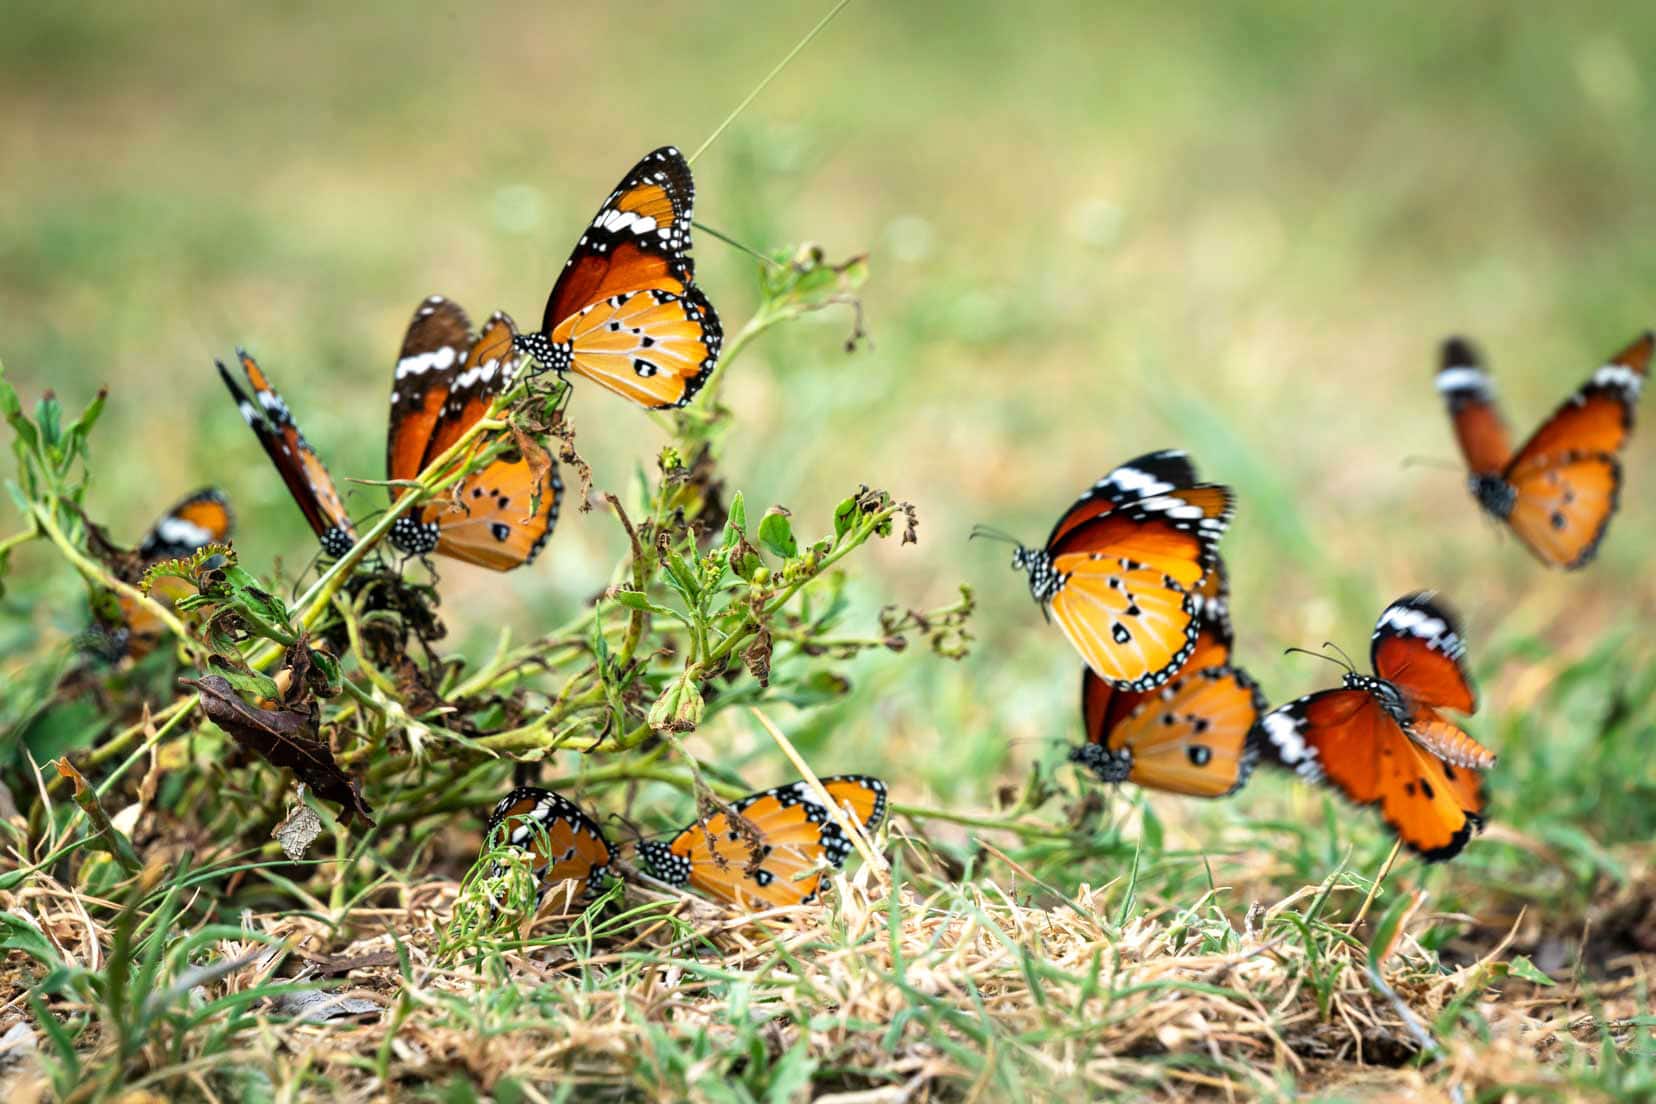 Butterflies around a small plant near the ground